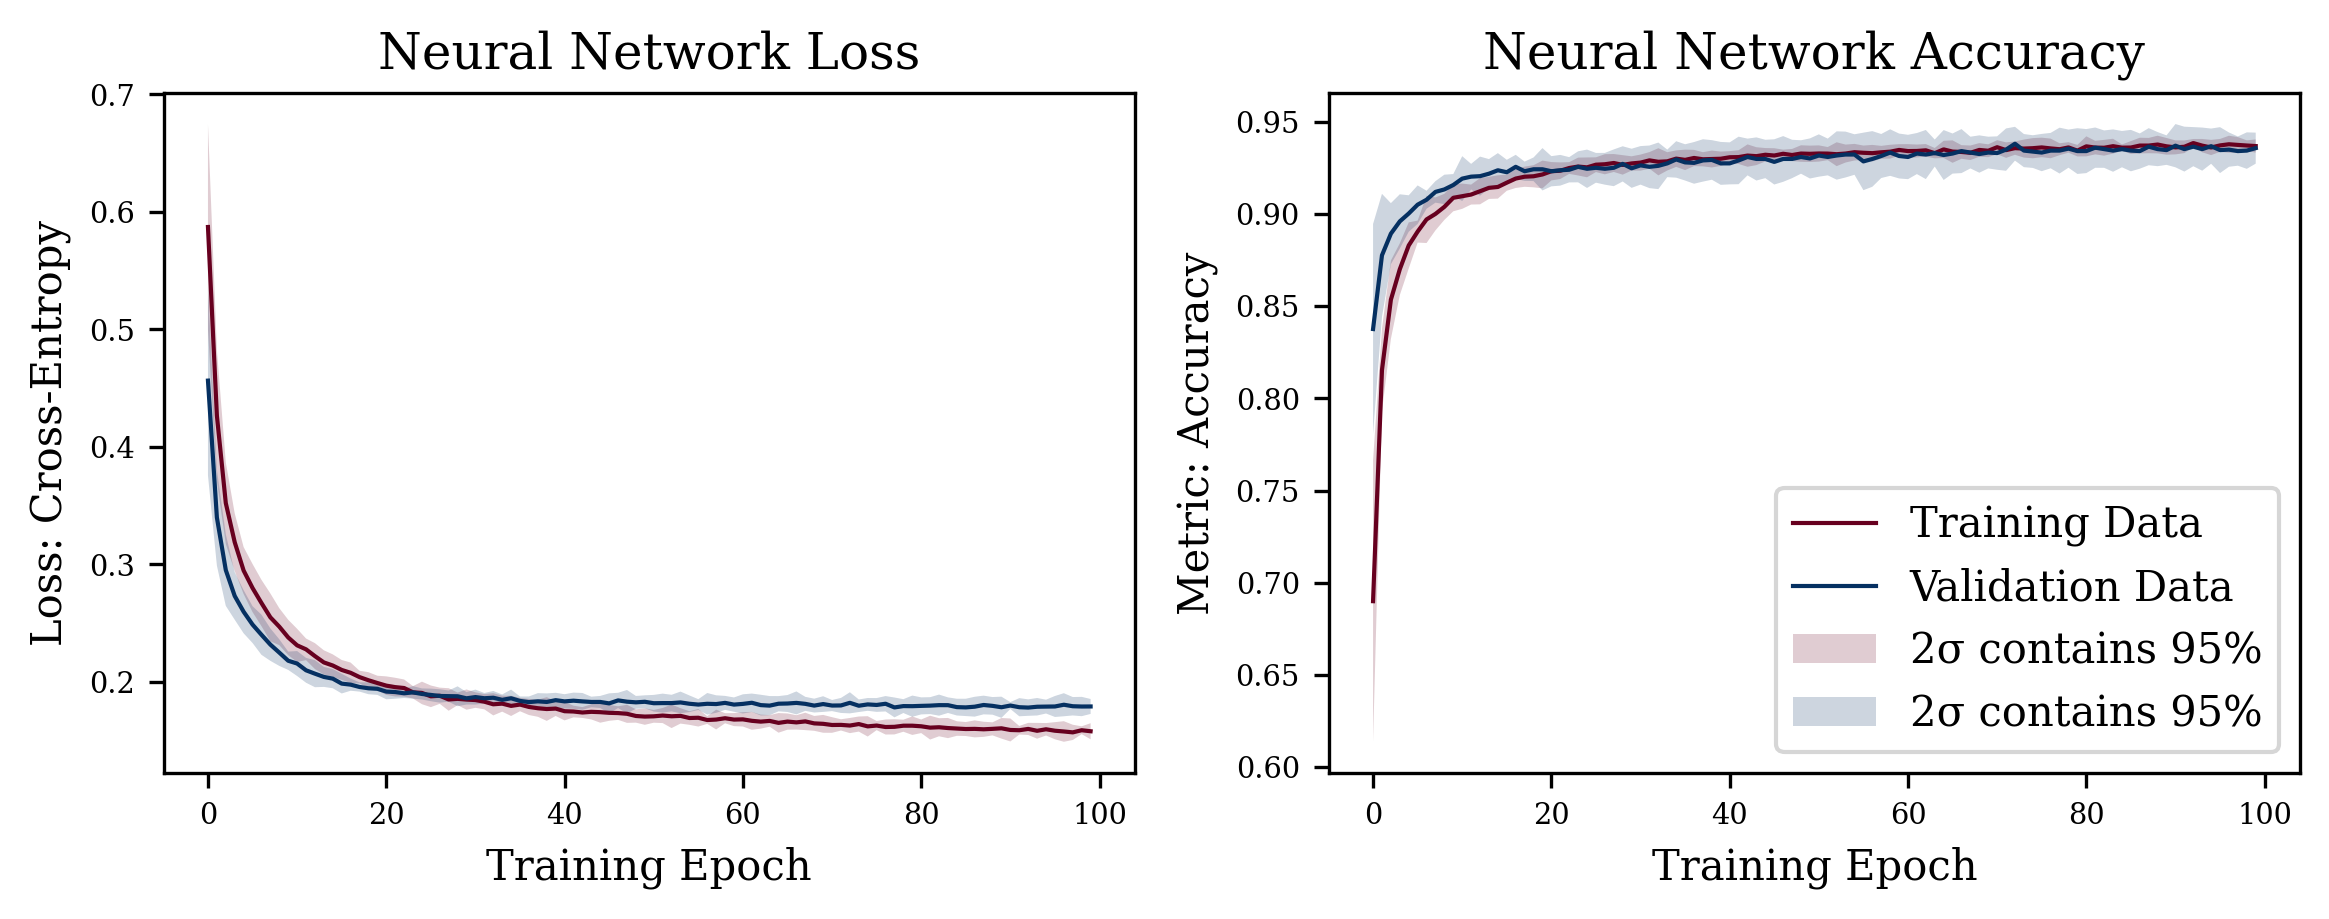 Loss and Accuracy of example neural network on ten random initializations. Training for 100 epochs with the shaded area showing the 95% confidence intervals of the loss and metric. Analyzing loss curves is important to evaluate overfitting. The trining loss decreasing, while validation loss is close to plateauing is a sign of overfitting. Generally, it can be seen that the model converged and is only making marginal gains with the risk of overfitting.